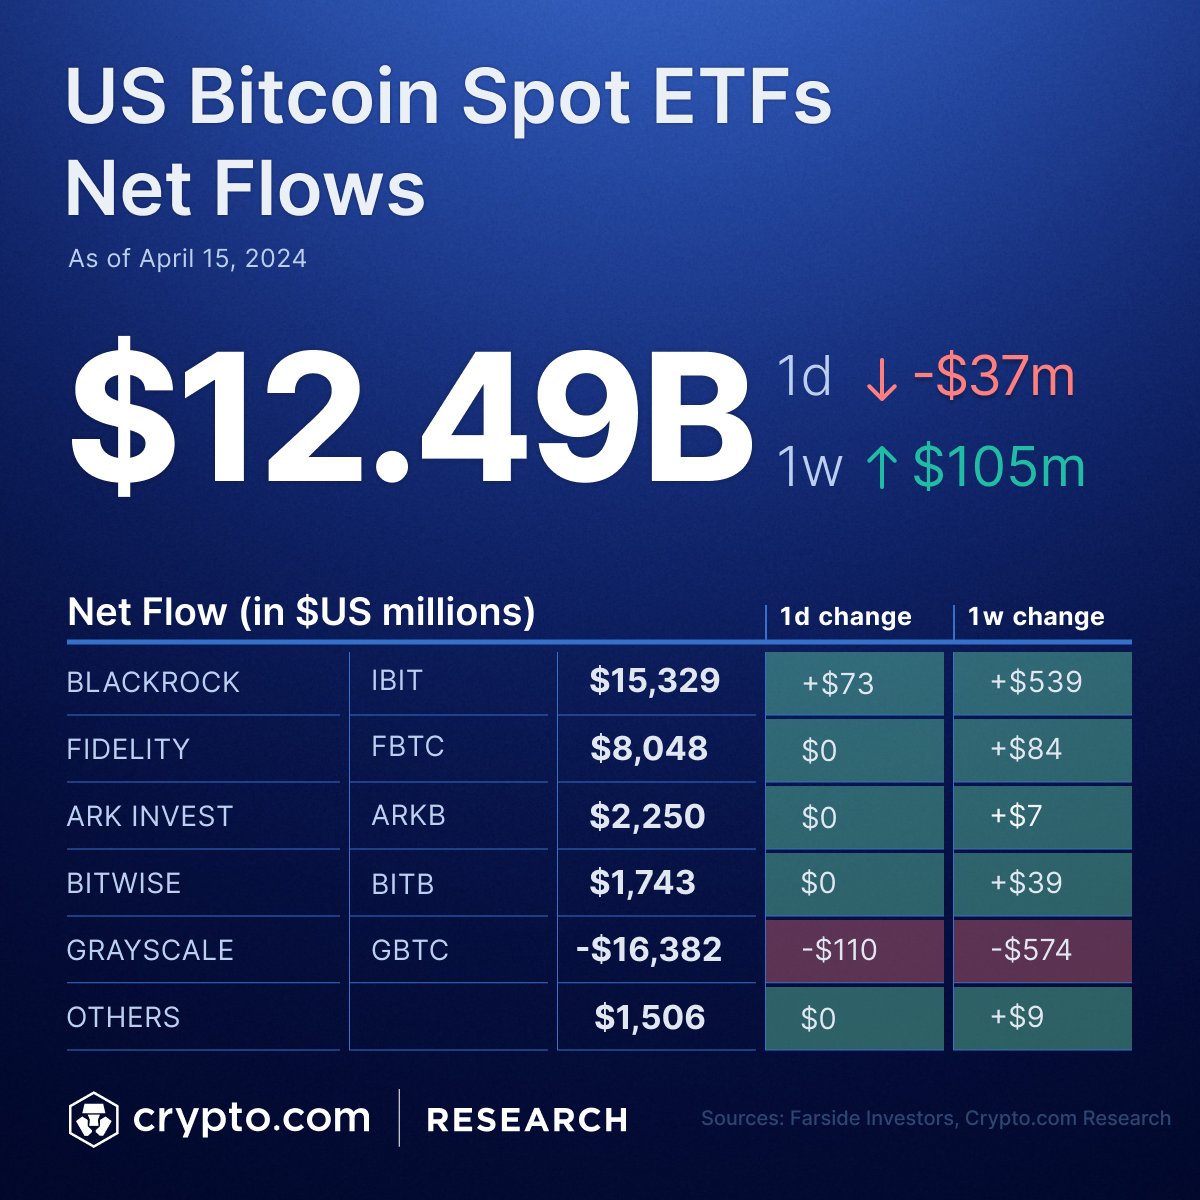 💸 Latest data shows US Spot #Bitcoin ETFs with a total net inflow of $12.49B and daily net outflow of $37M on 15 April. BlackRock’s iShares Bitcoin Trust (IBIT) became the only fund with net inflows since last Friday.